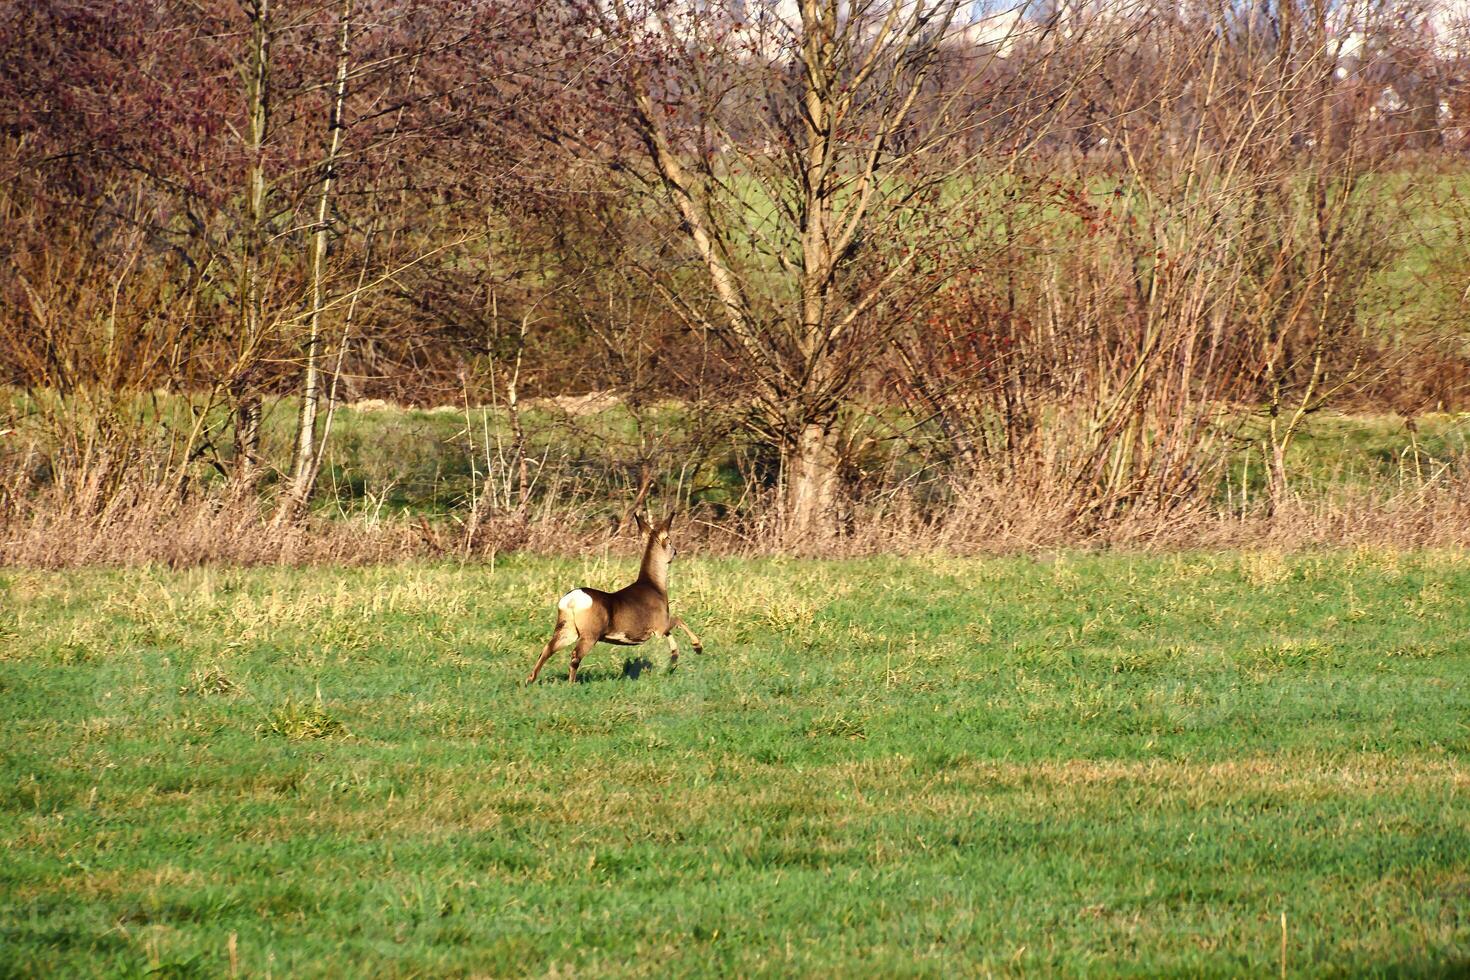 Deer on the run in a meadow. Jumping over the green grass. Animal photo